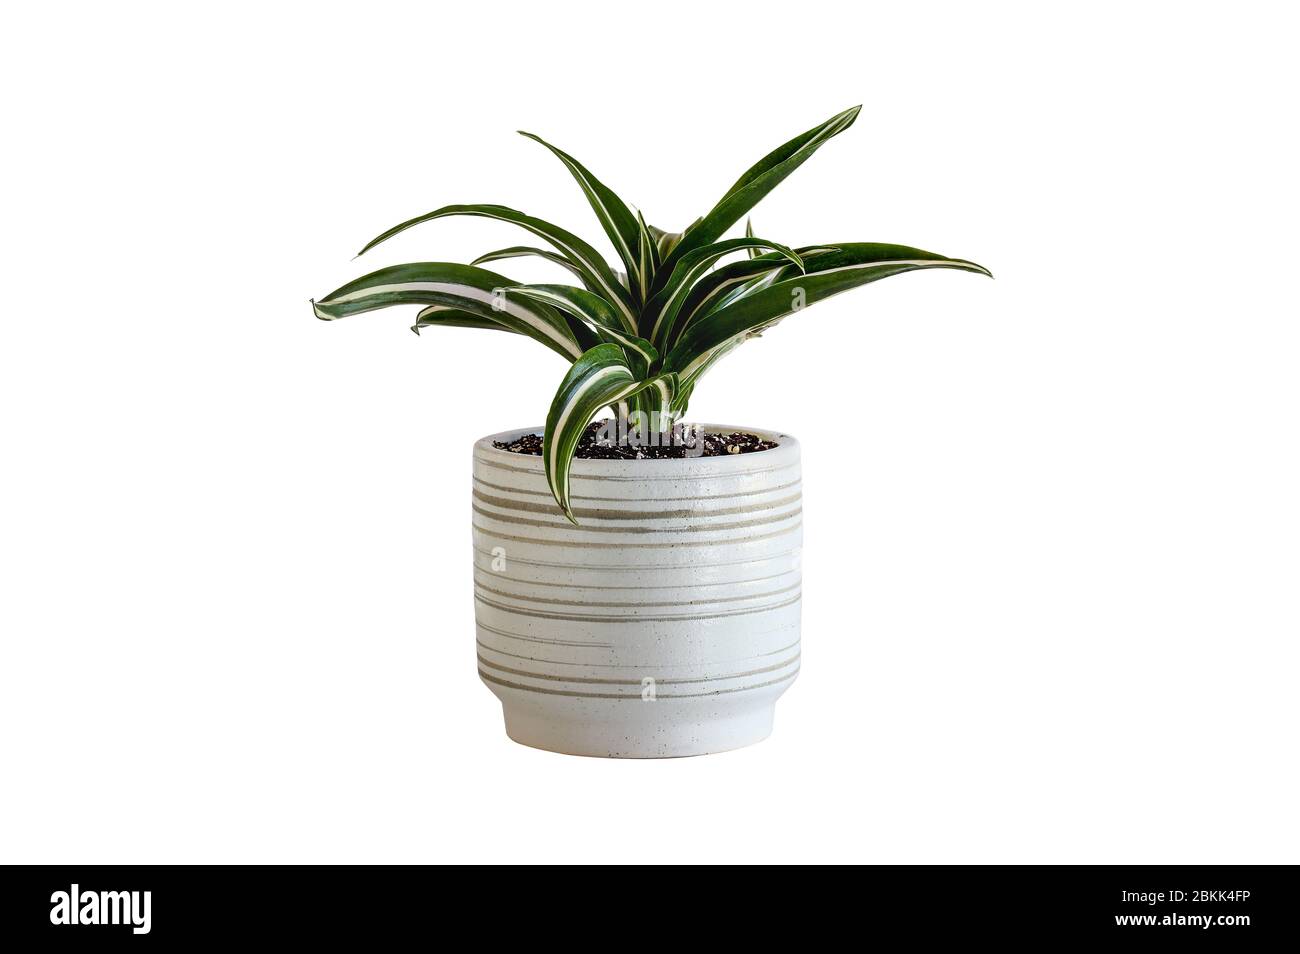 Potted White Jewel, Dracaena Deremensis, houseplant isolated over a white background with clipping path included. Stock Photo